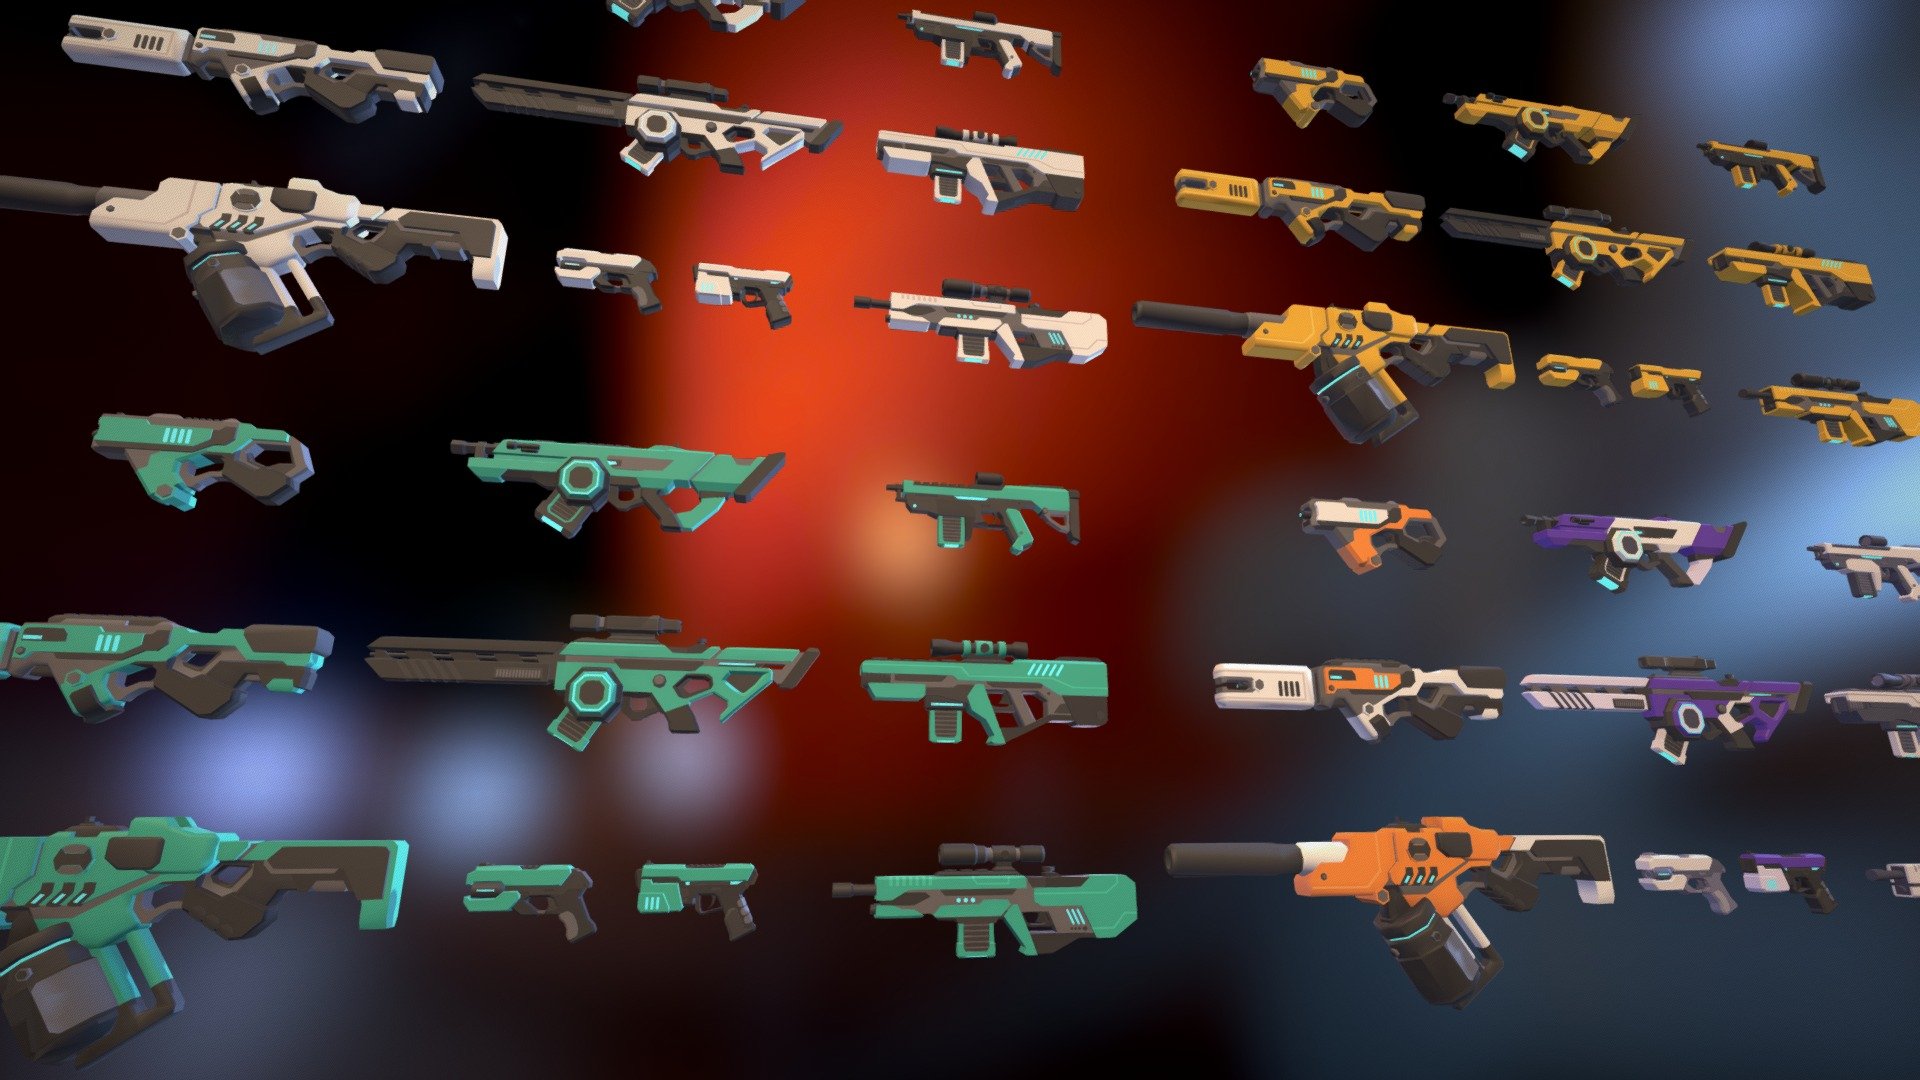 3D Props Sci-fi Gun Pack1

It's a low-poly style gun that can be applied to Sci-fi genres of game production.
This package contains total of 40 FBX Items.

◼ Key Features ◼

• 40 FBX Items as 3D Sci-fi Gun Modeling
• 40 Sources as FBX
• Material and Texture Workflow

◼ Asset Includes ◼

Sci-fi Guns - 3D Props - Sci-fi Gun1 - Buy Royalty Free 3D model by layerlab 3d model